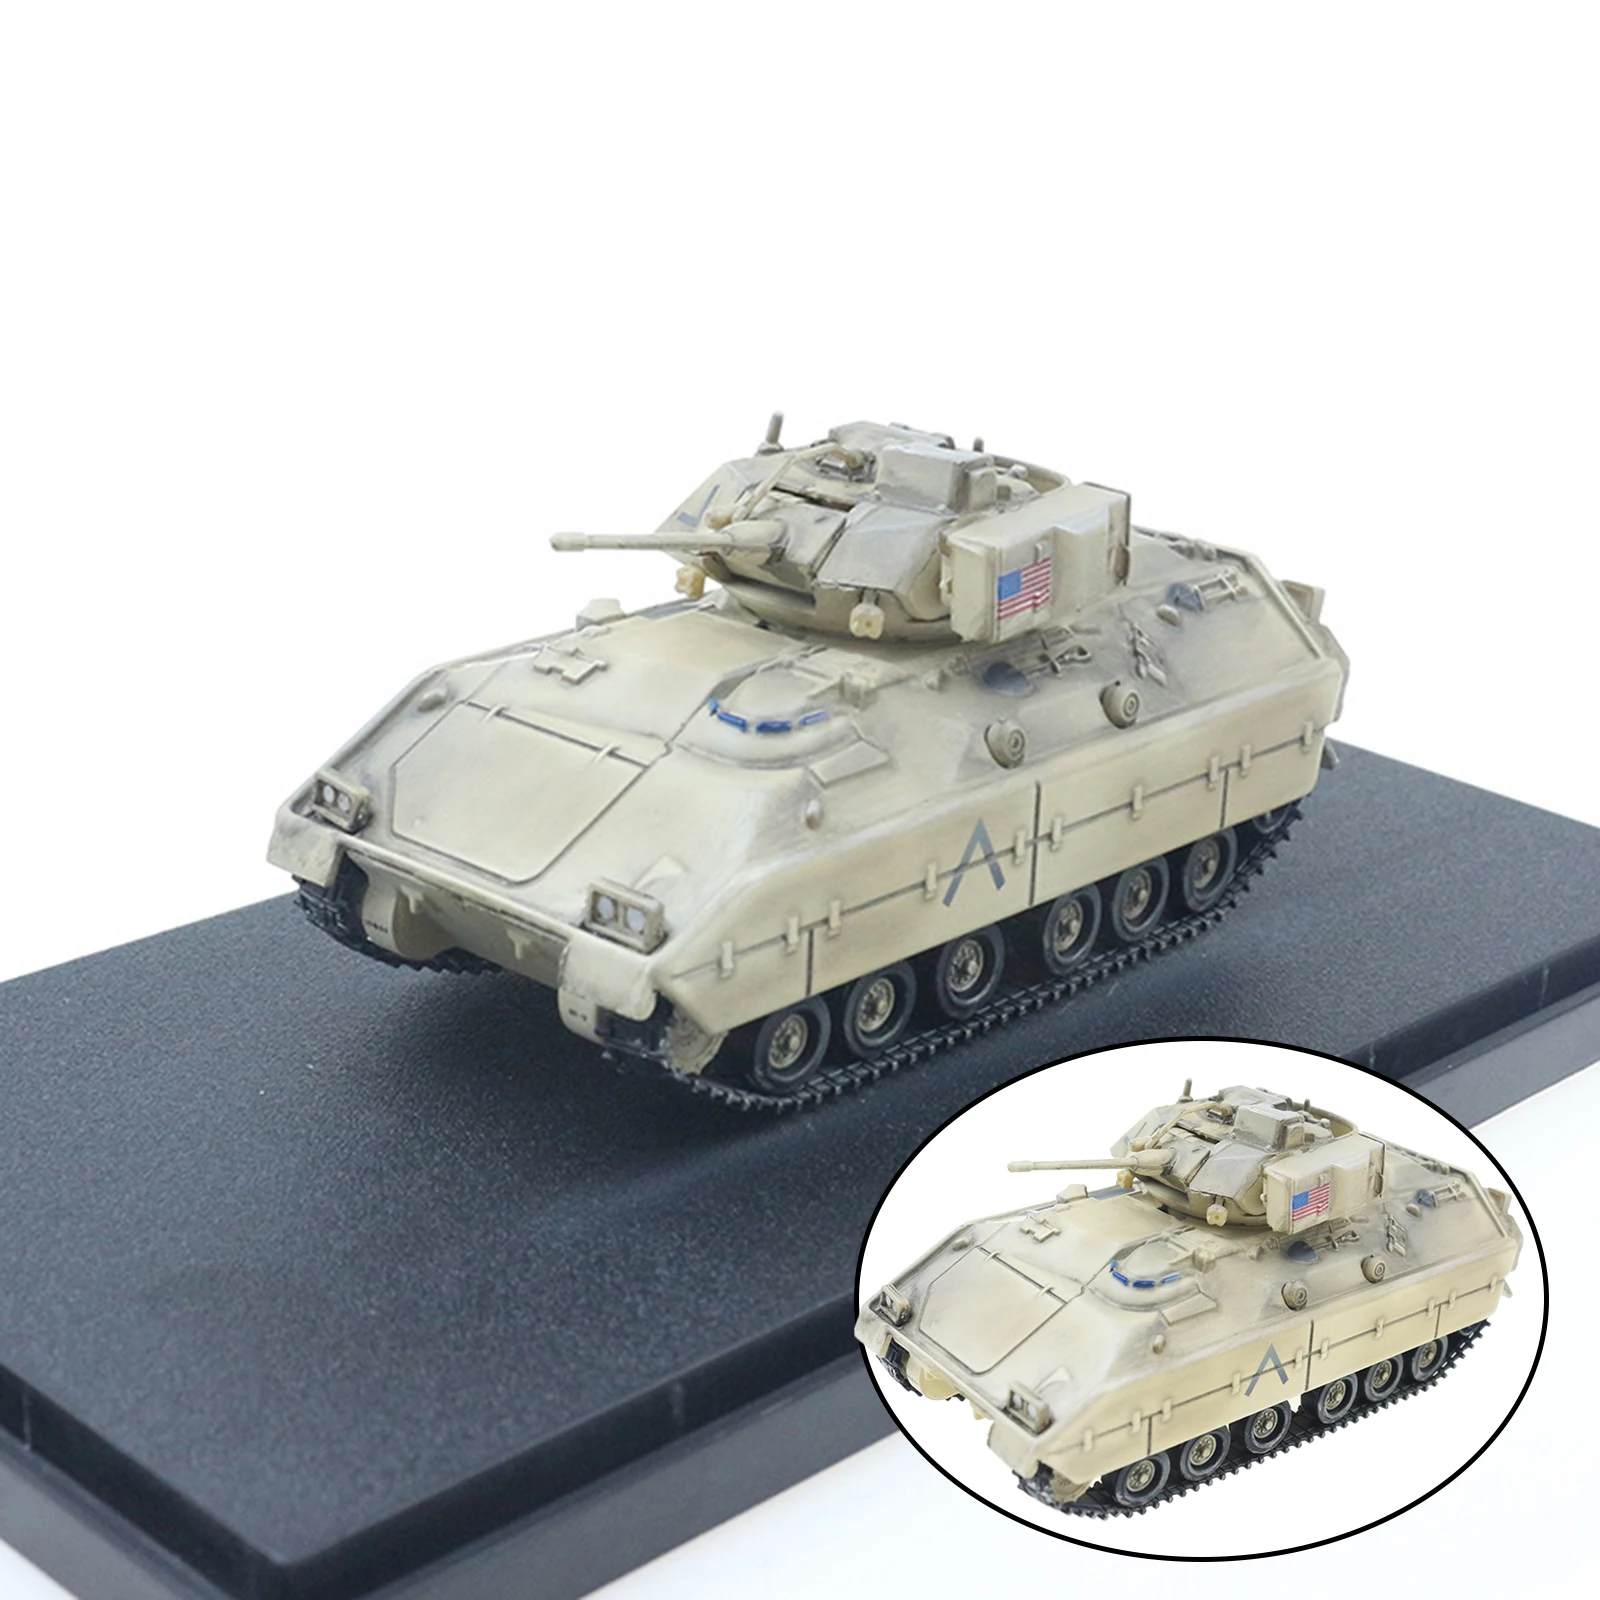 1:72 Metal 12107B M2 IFV Diecast Tank Model Alloy Adult Gifts for Boys Decorations